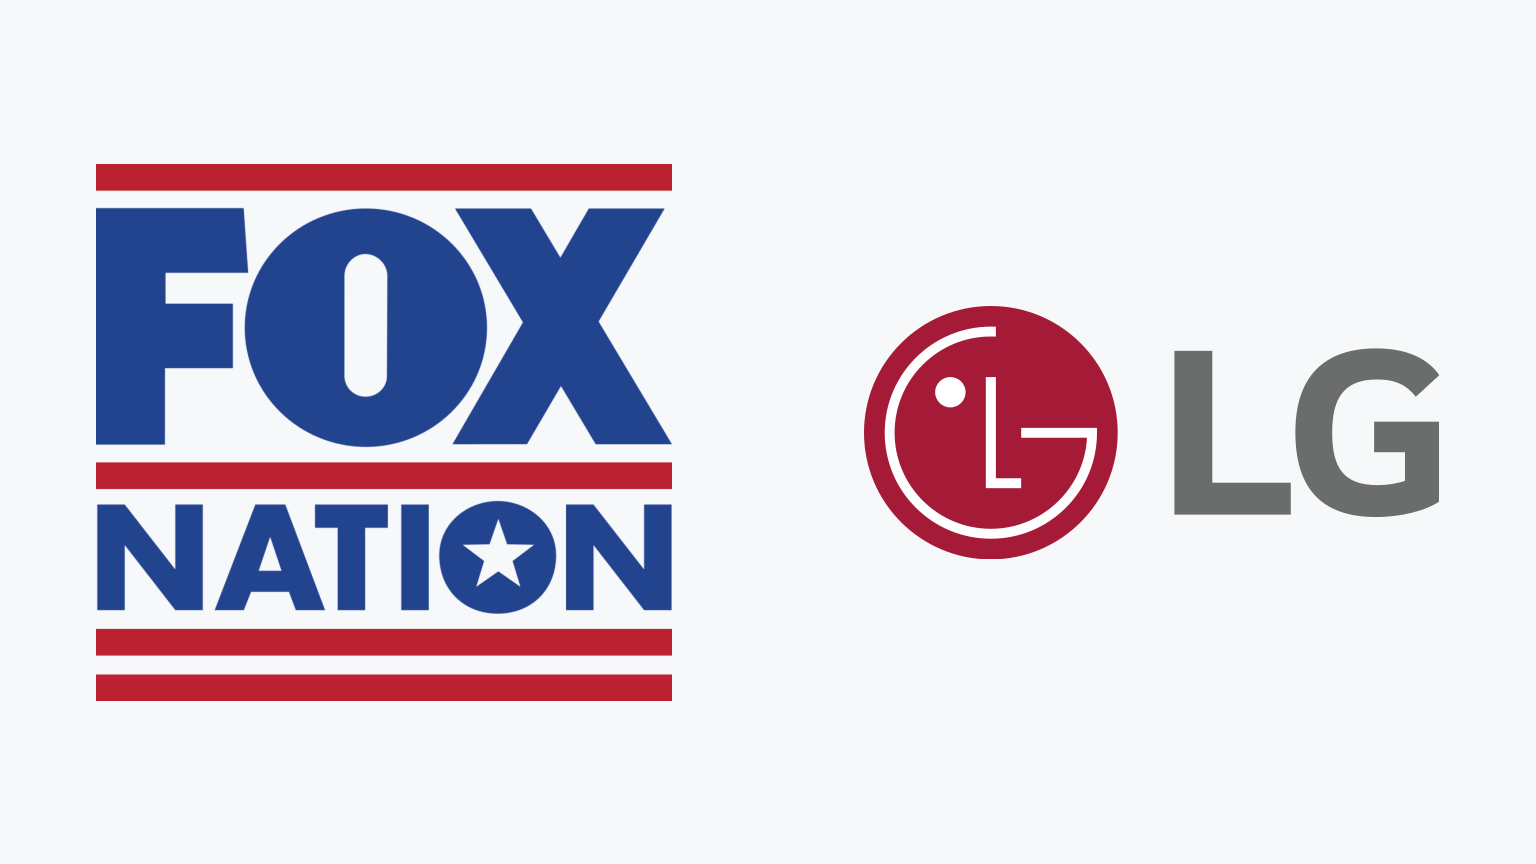 How To Add Fox Nation App To LG Smart TV